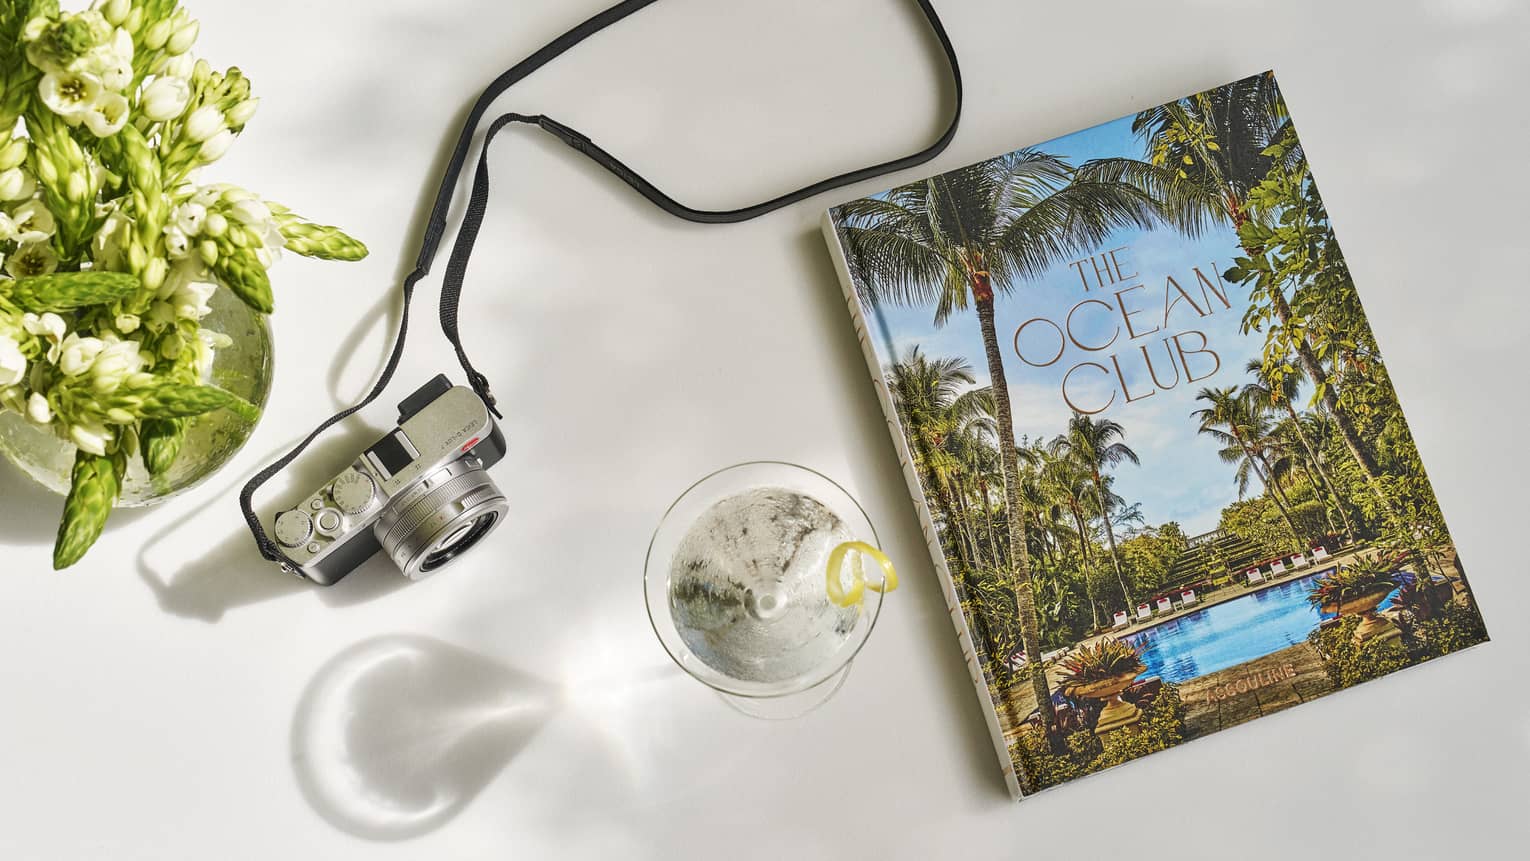 A large book with a pool and palm trees on the cover next to a drink and camera.